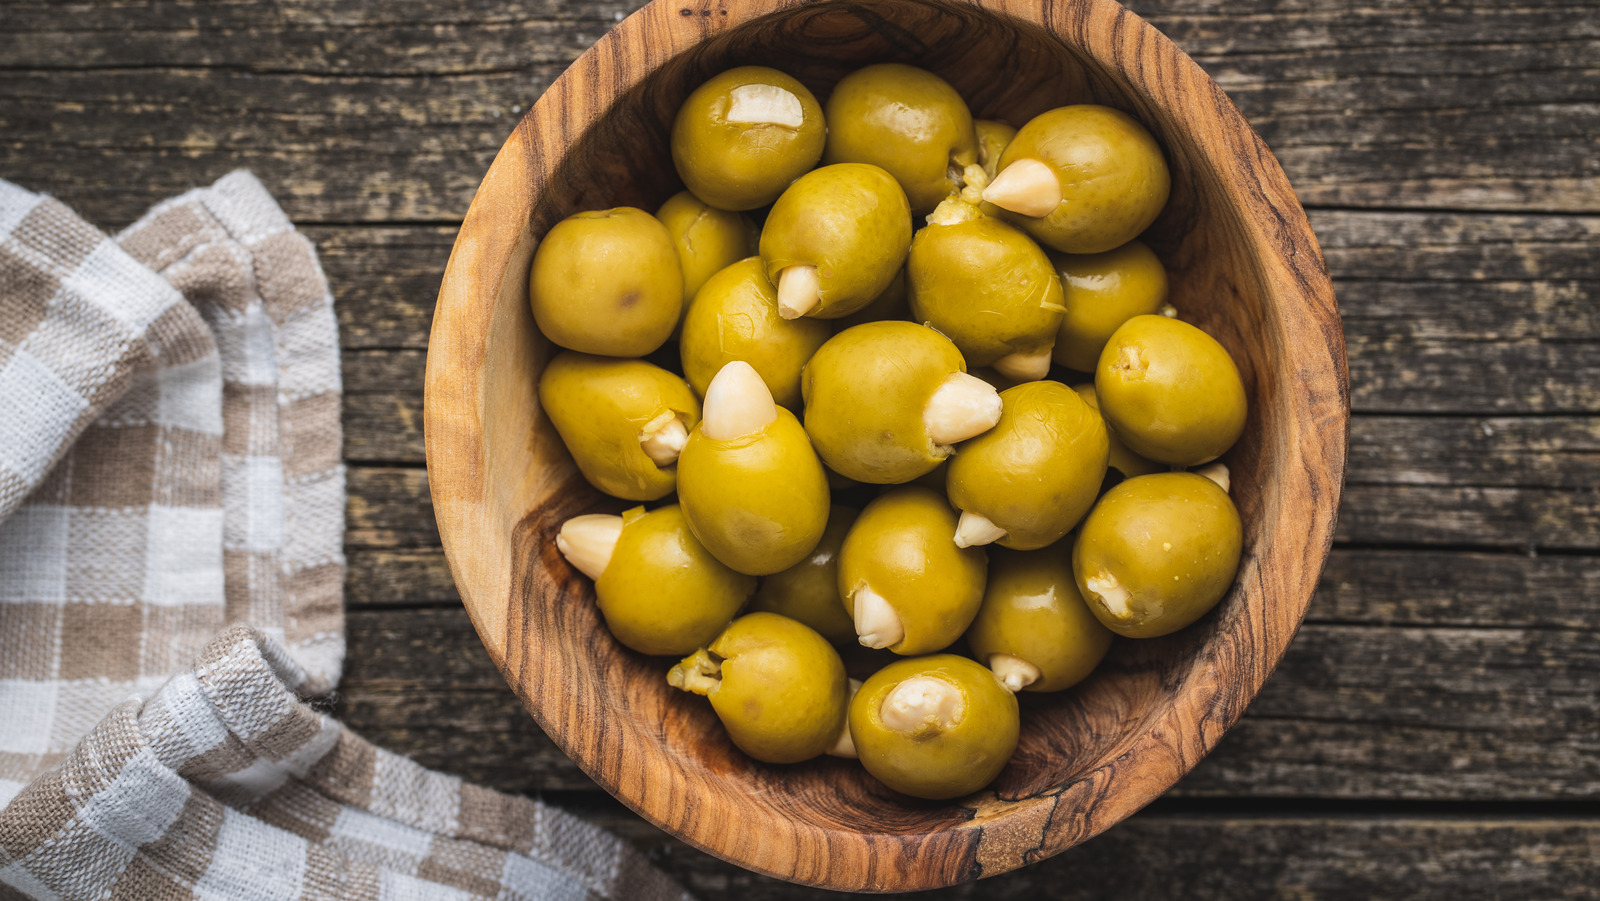 Trader Joe’s Giant Stuffed Olives Are Perfect For Your Next Charcuterie Board – The Daily Meal